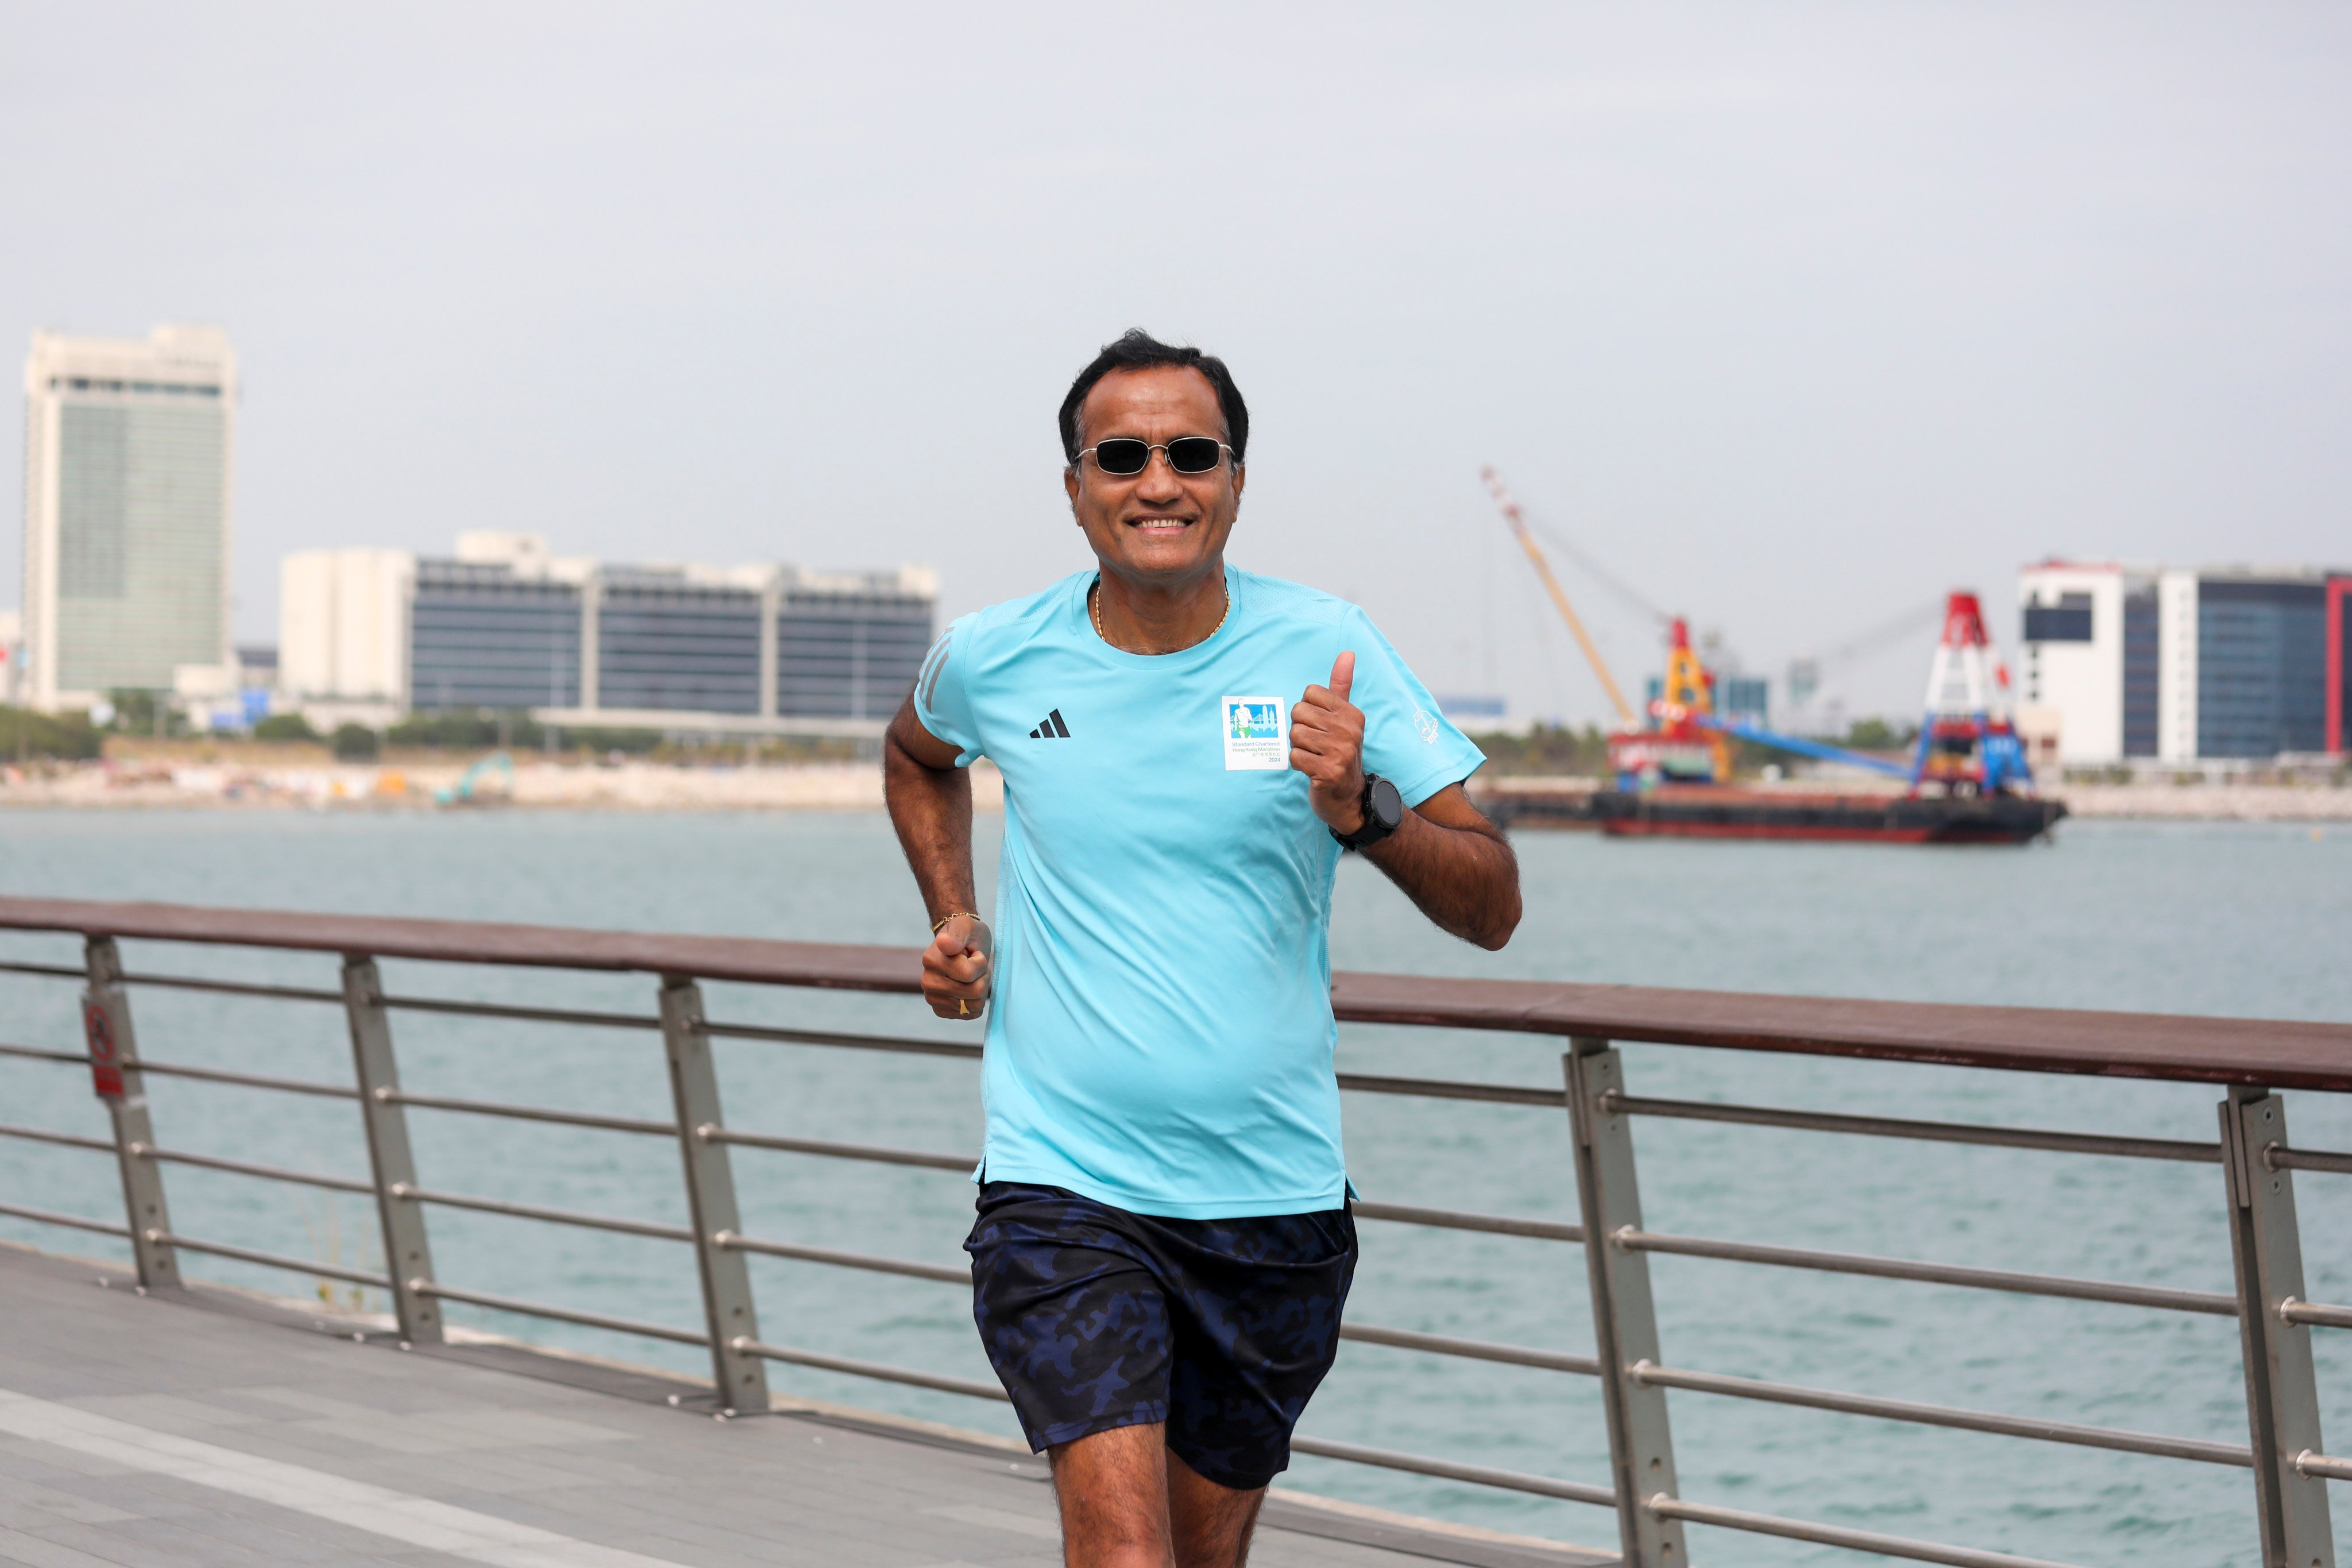 Ravi Chandra was diagnosed with diabetes at the age of 51 in 2015. Instead of medicine, he took up running - and he has not stopped since. Photo: Xiaomei Chen